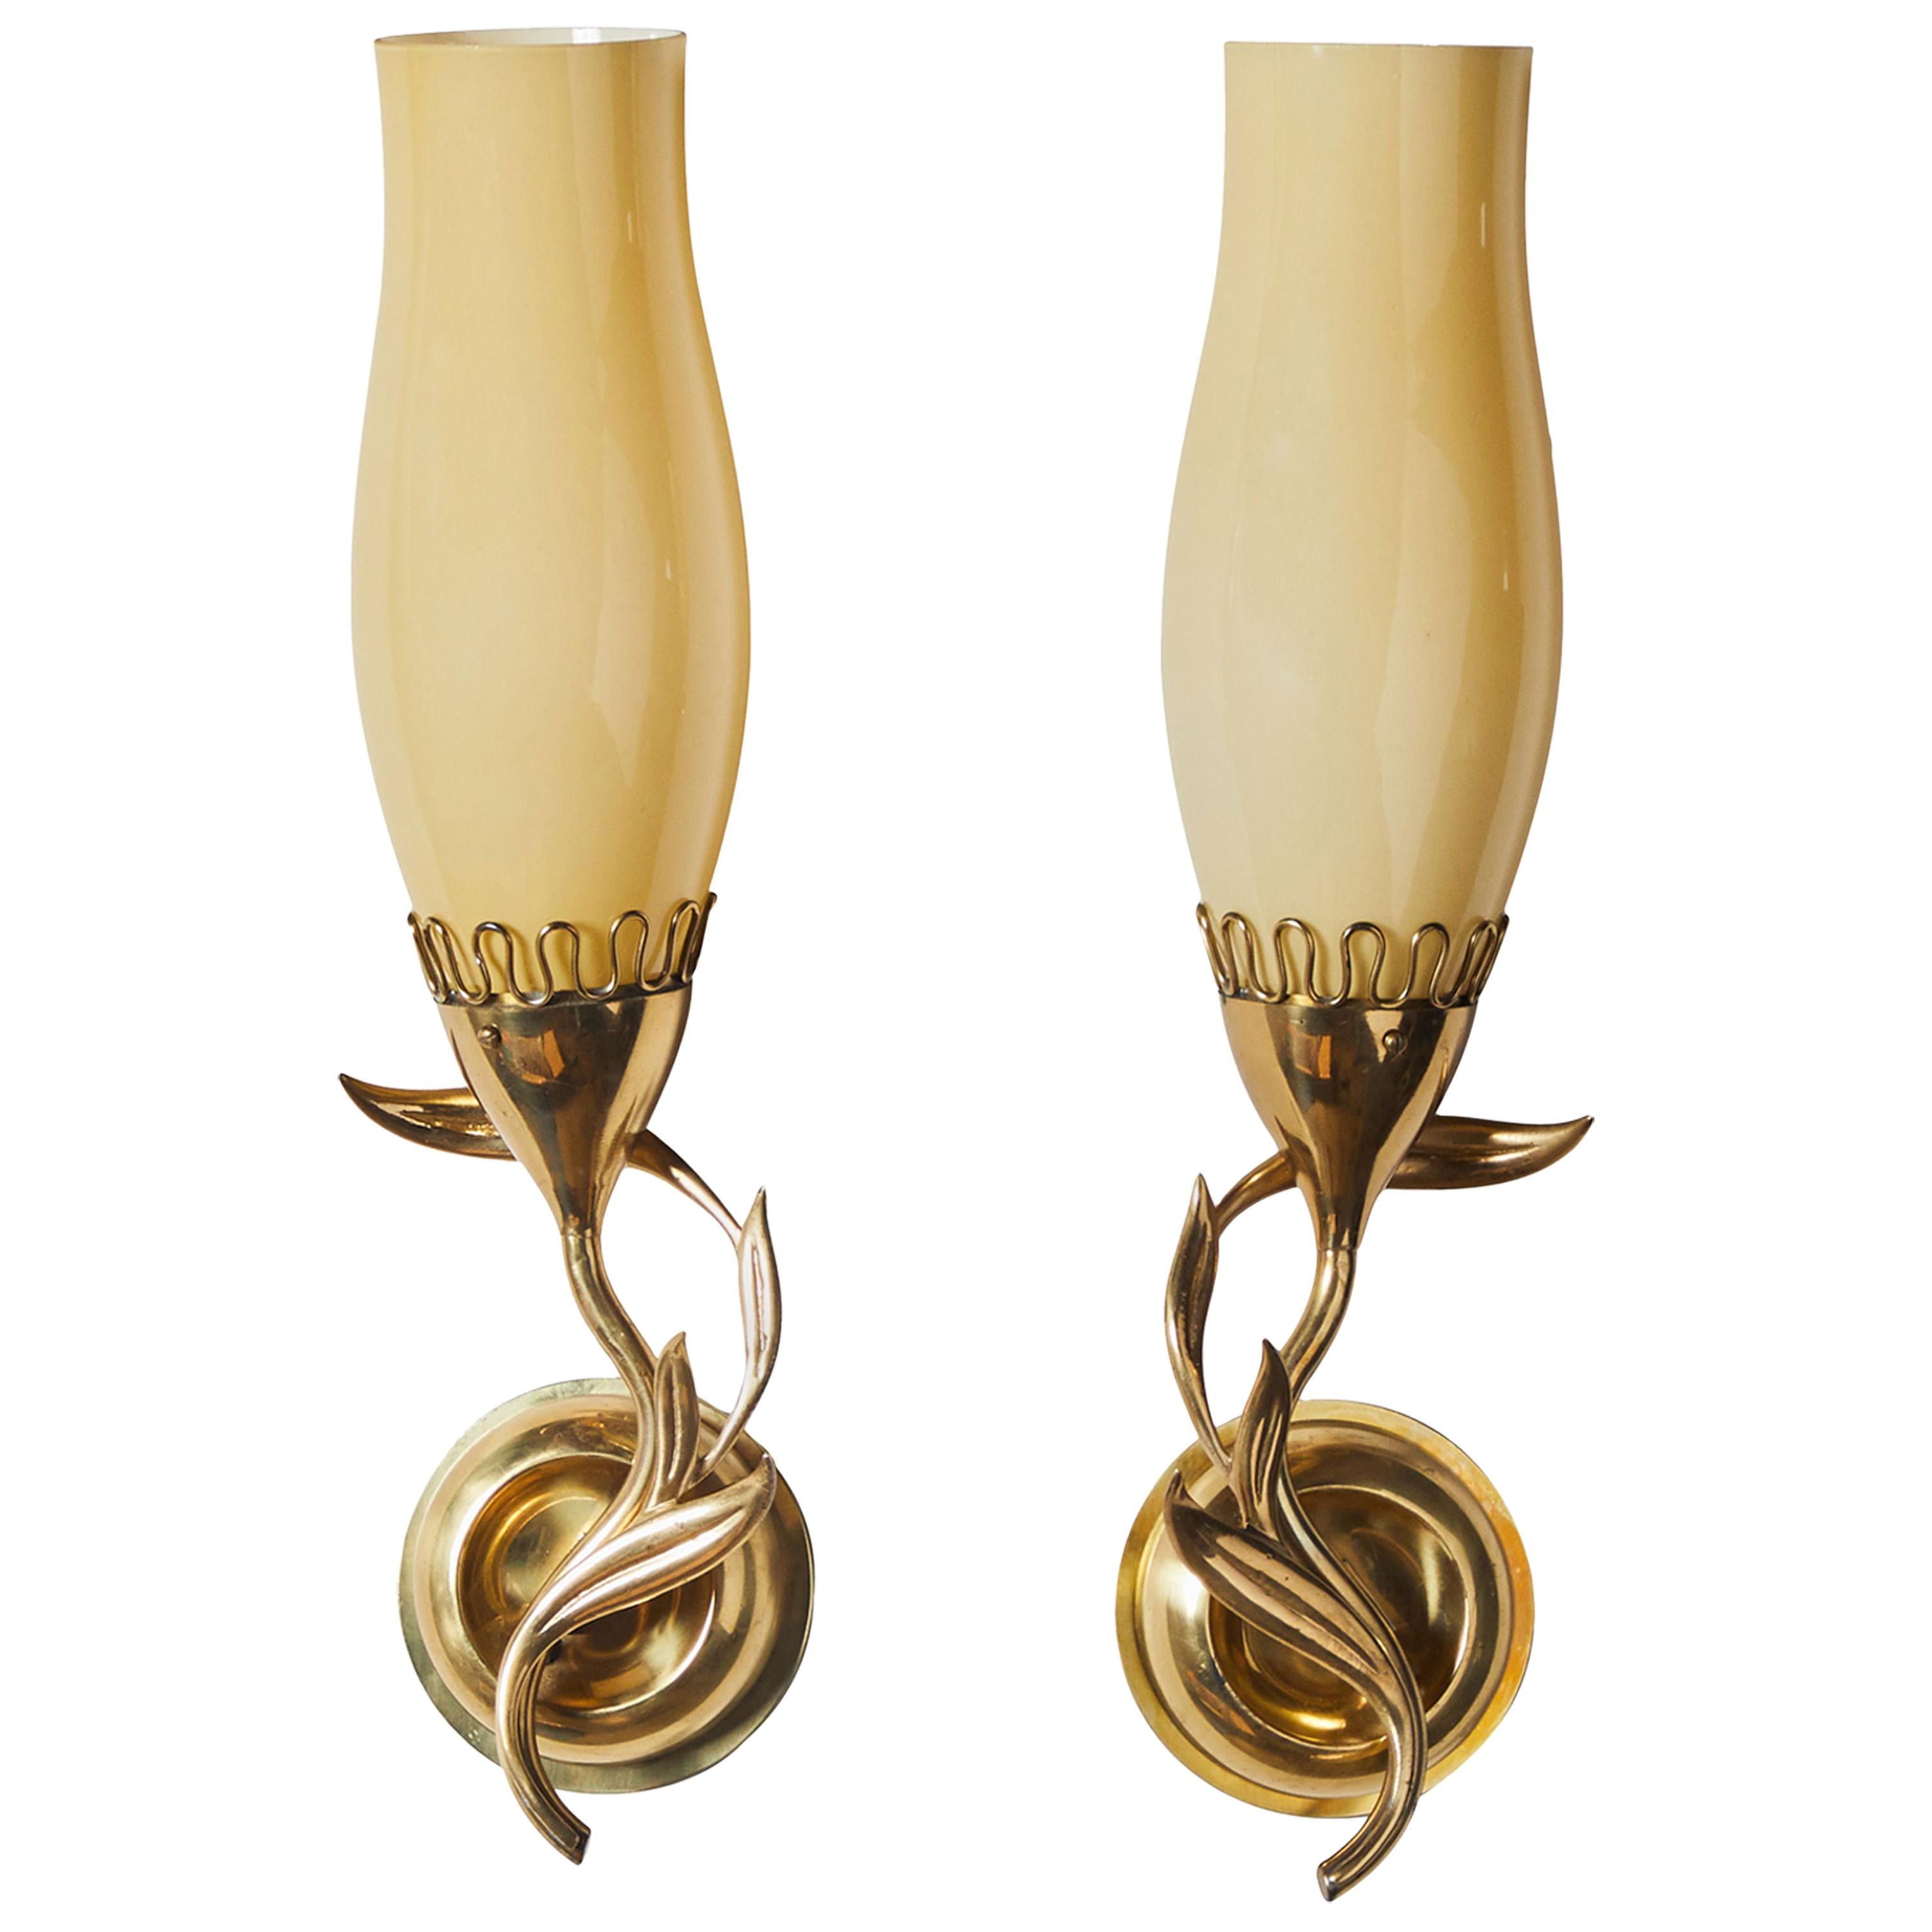 Pair of Sconces by Paavo Tynell for Idman Oy